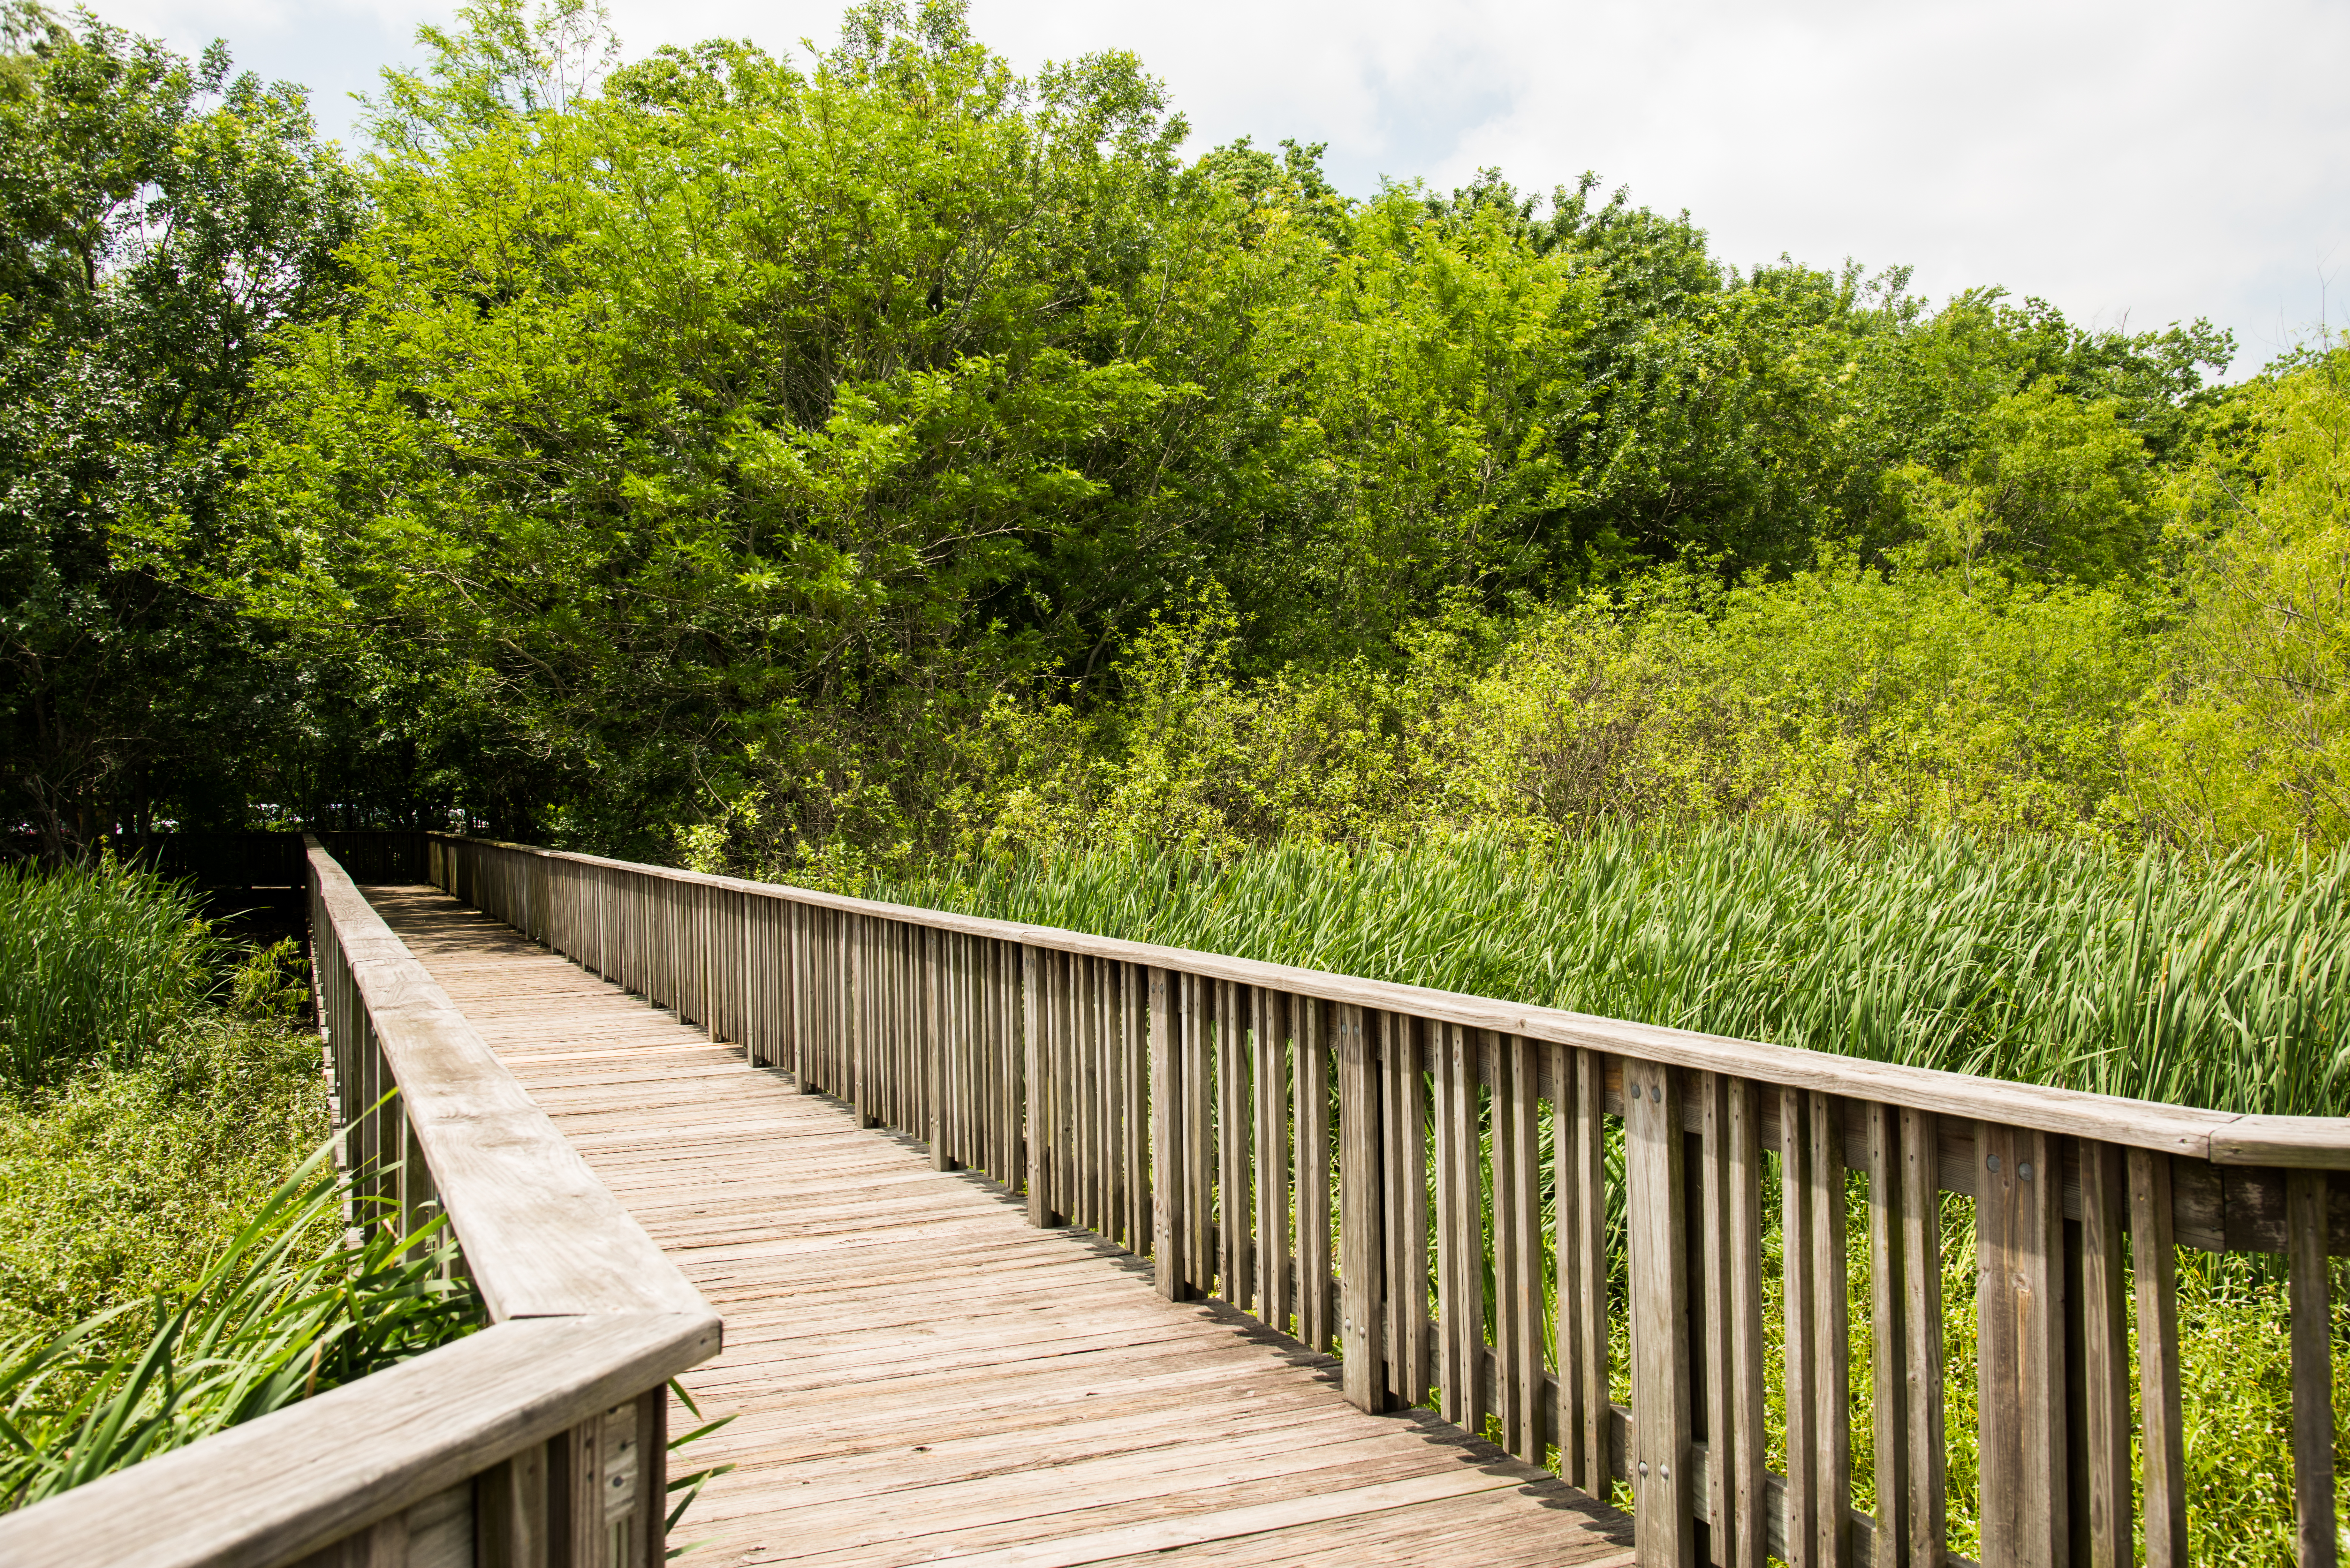 Boardwalk to the observation deck at Cullinan Park.